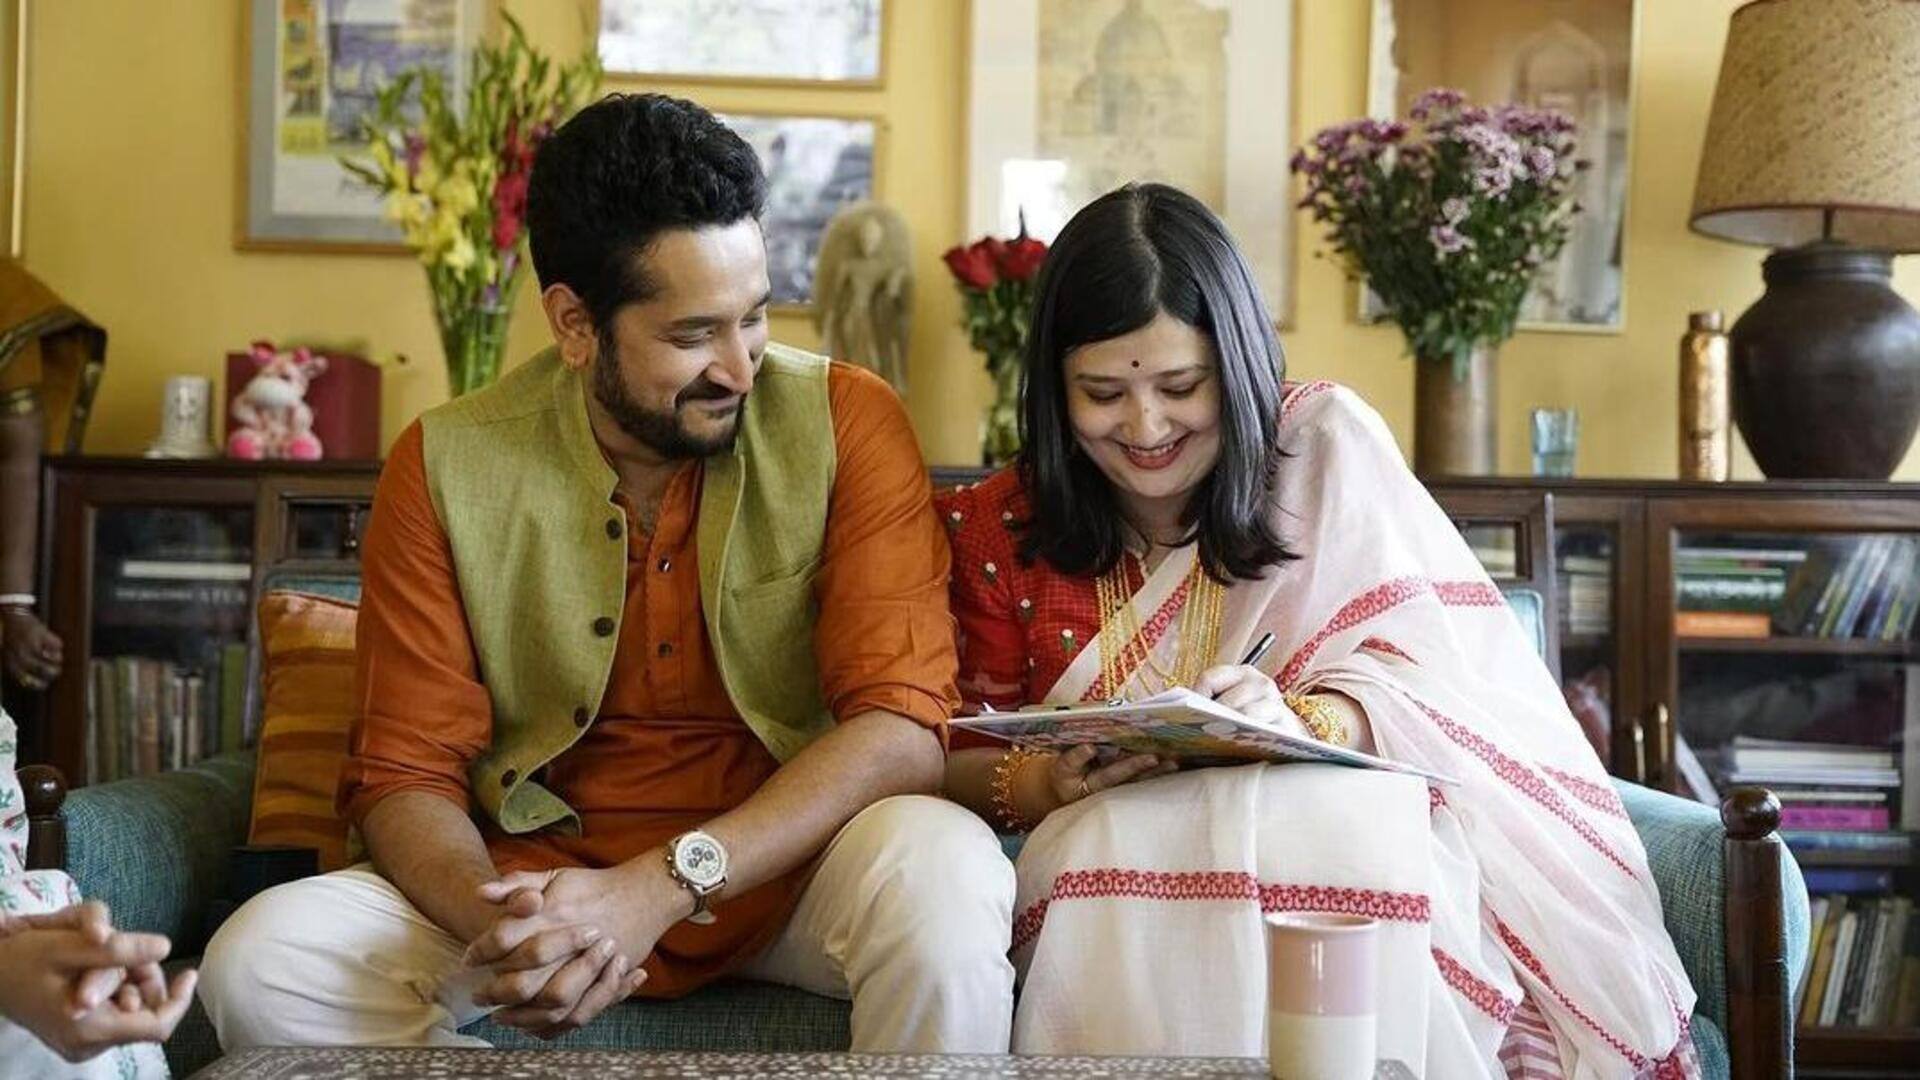 Official! Parambrata Chatterjee and Piya Chakraborty are now married